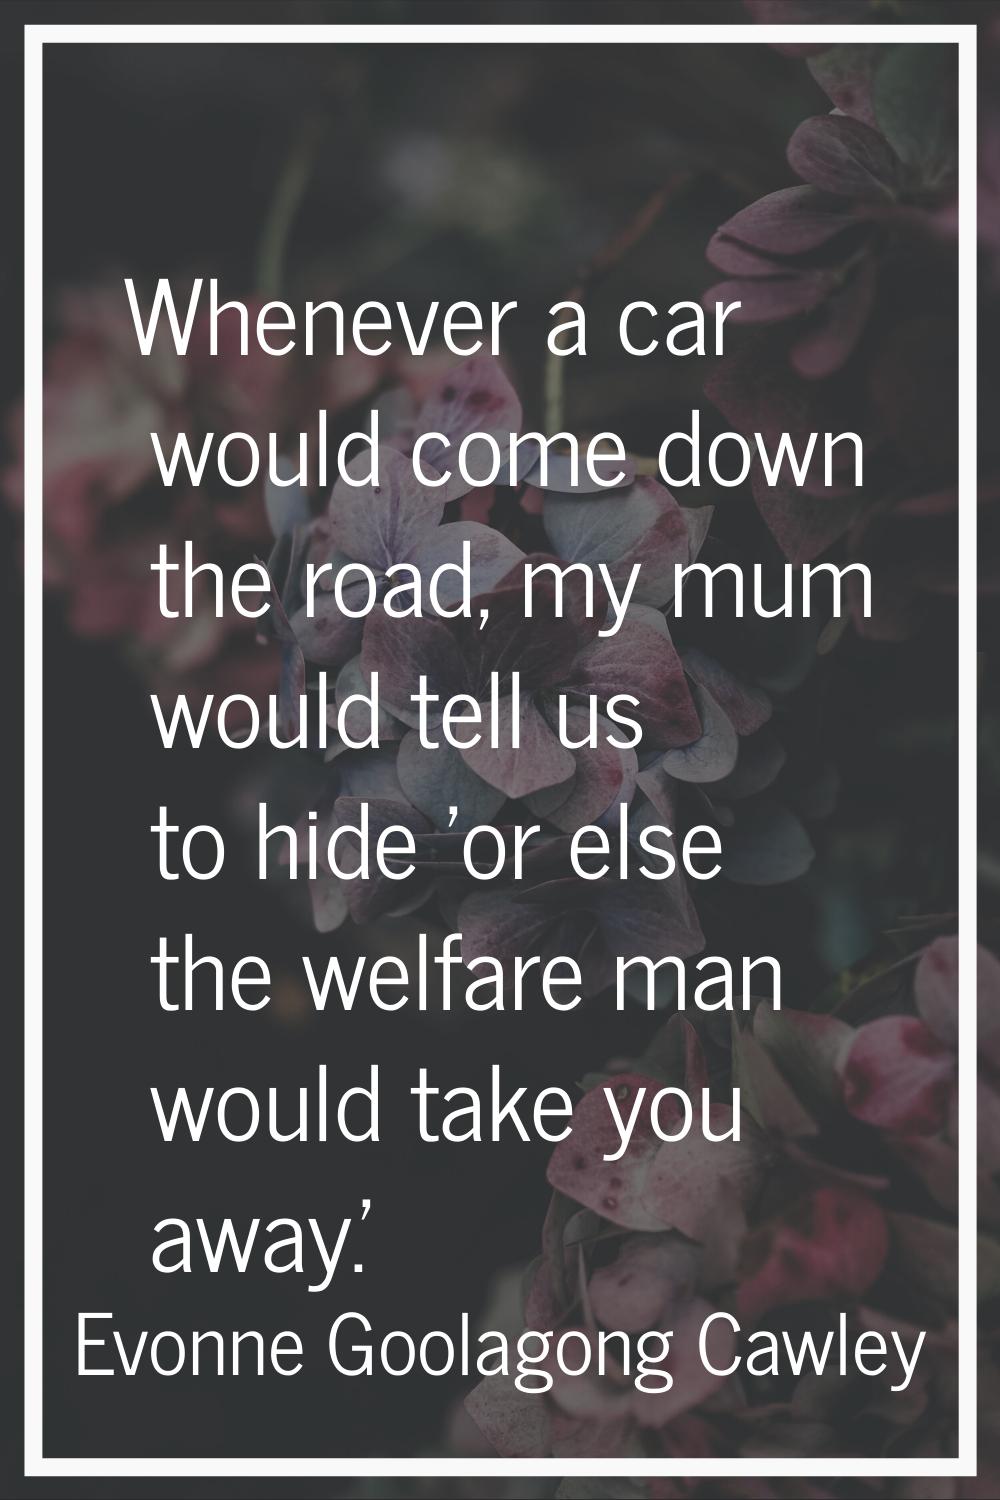 Whenever a car would come down the road, my mum would tell us to hide 'or else the welfare man woul